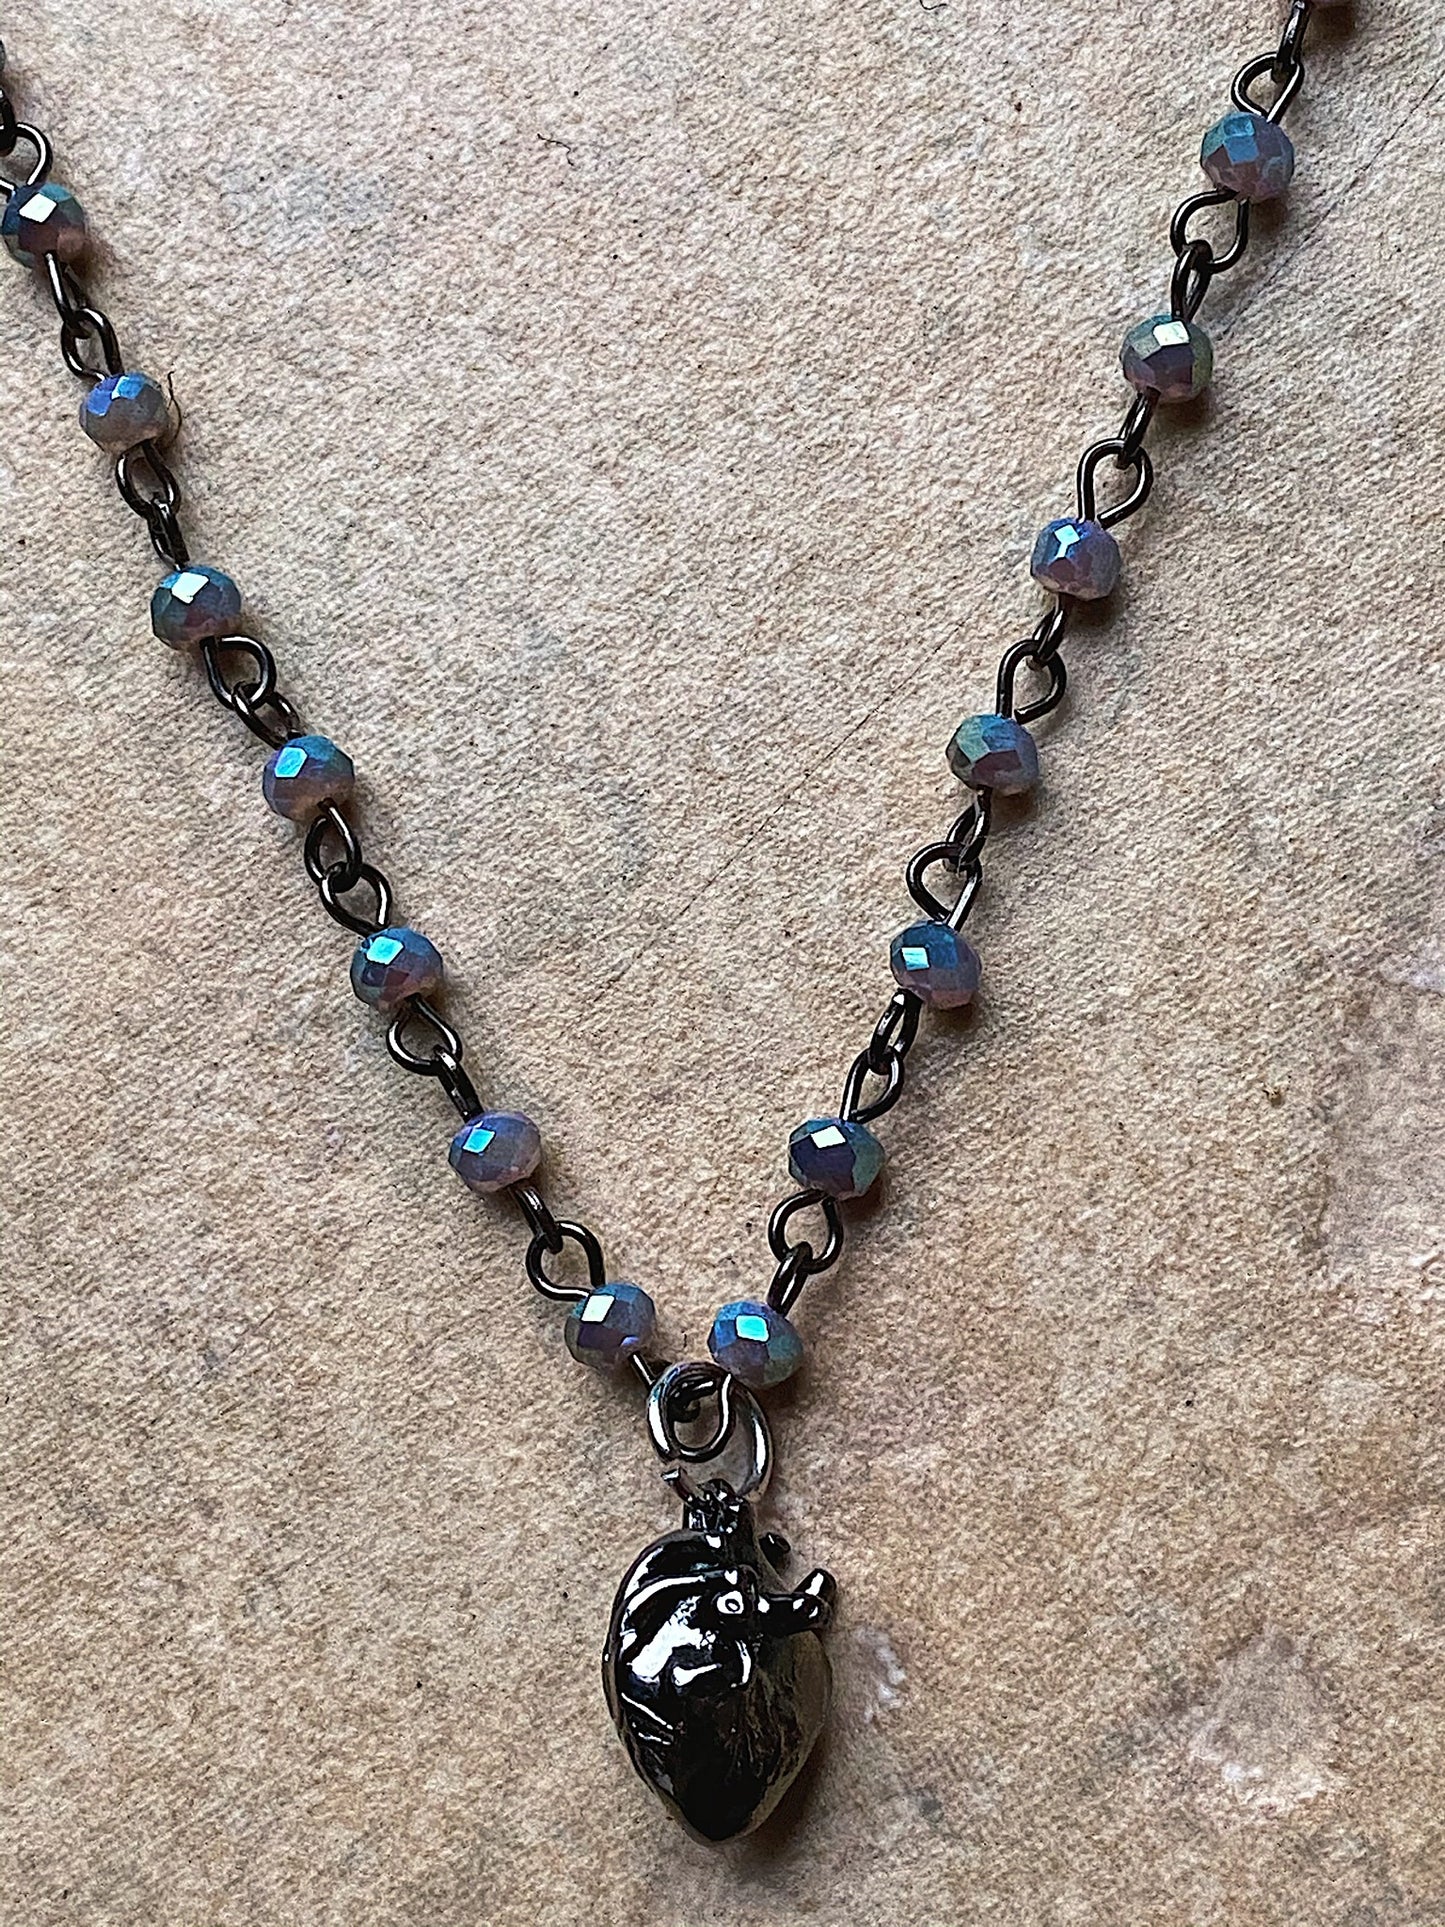 Poe Anatomical Heart Charm Beaded Necklace